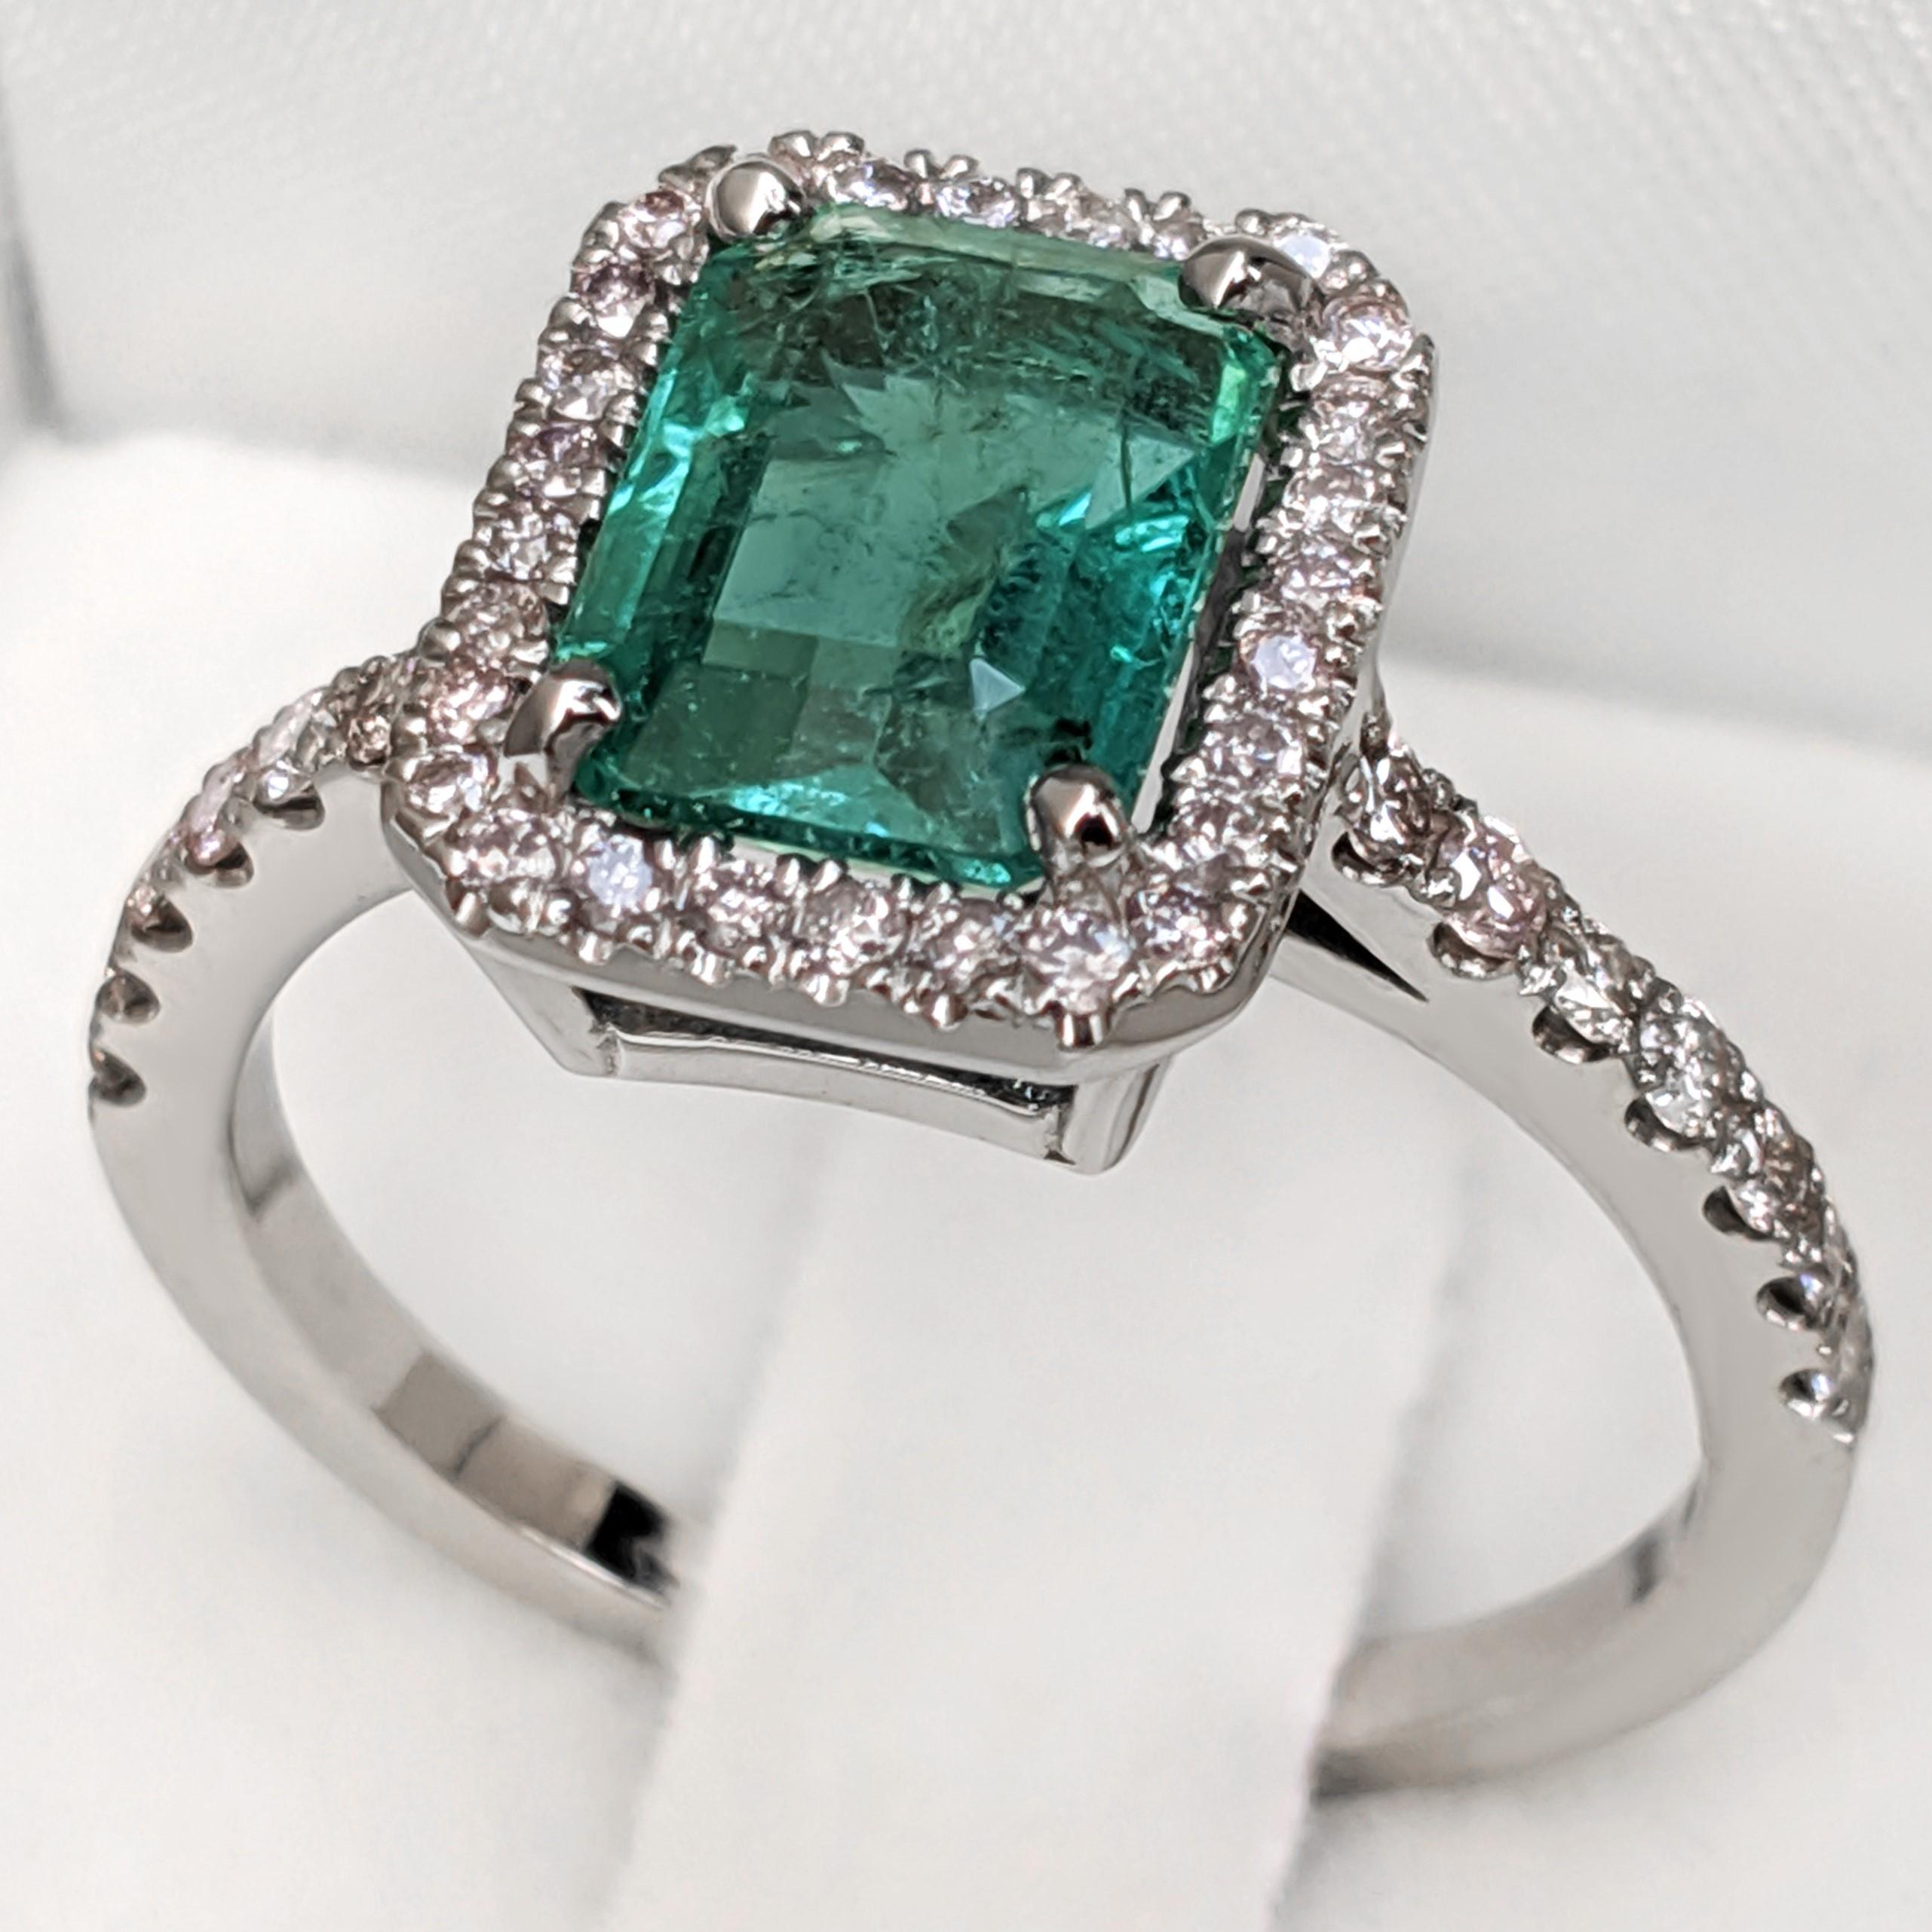 Women's NO RESERVE! 2.05 Carat Emerald and 0.41Ct Diamonds - 14 kt. White gold - Ring For Sale